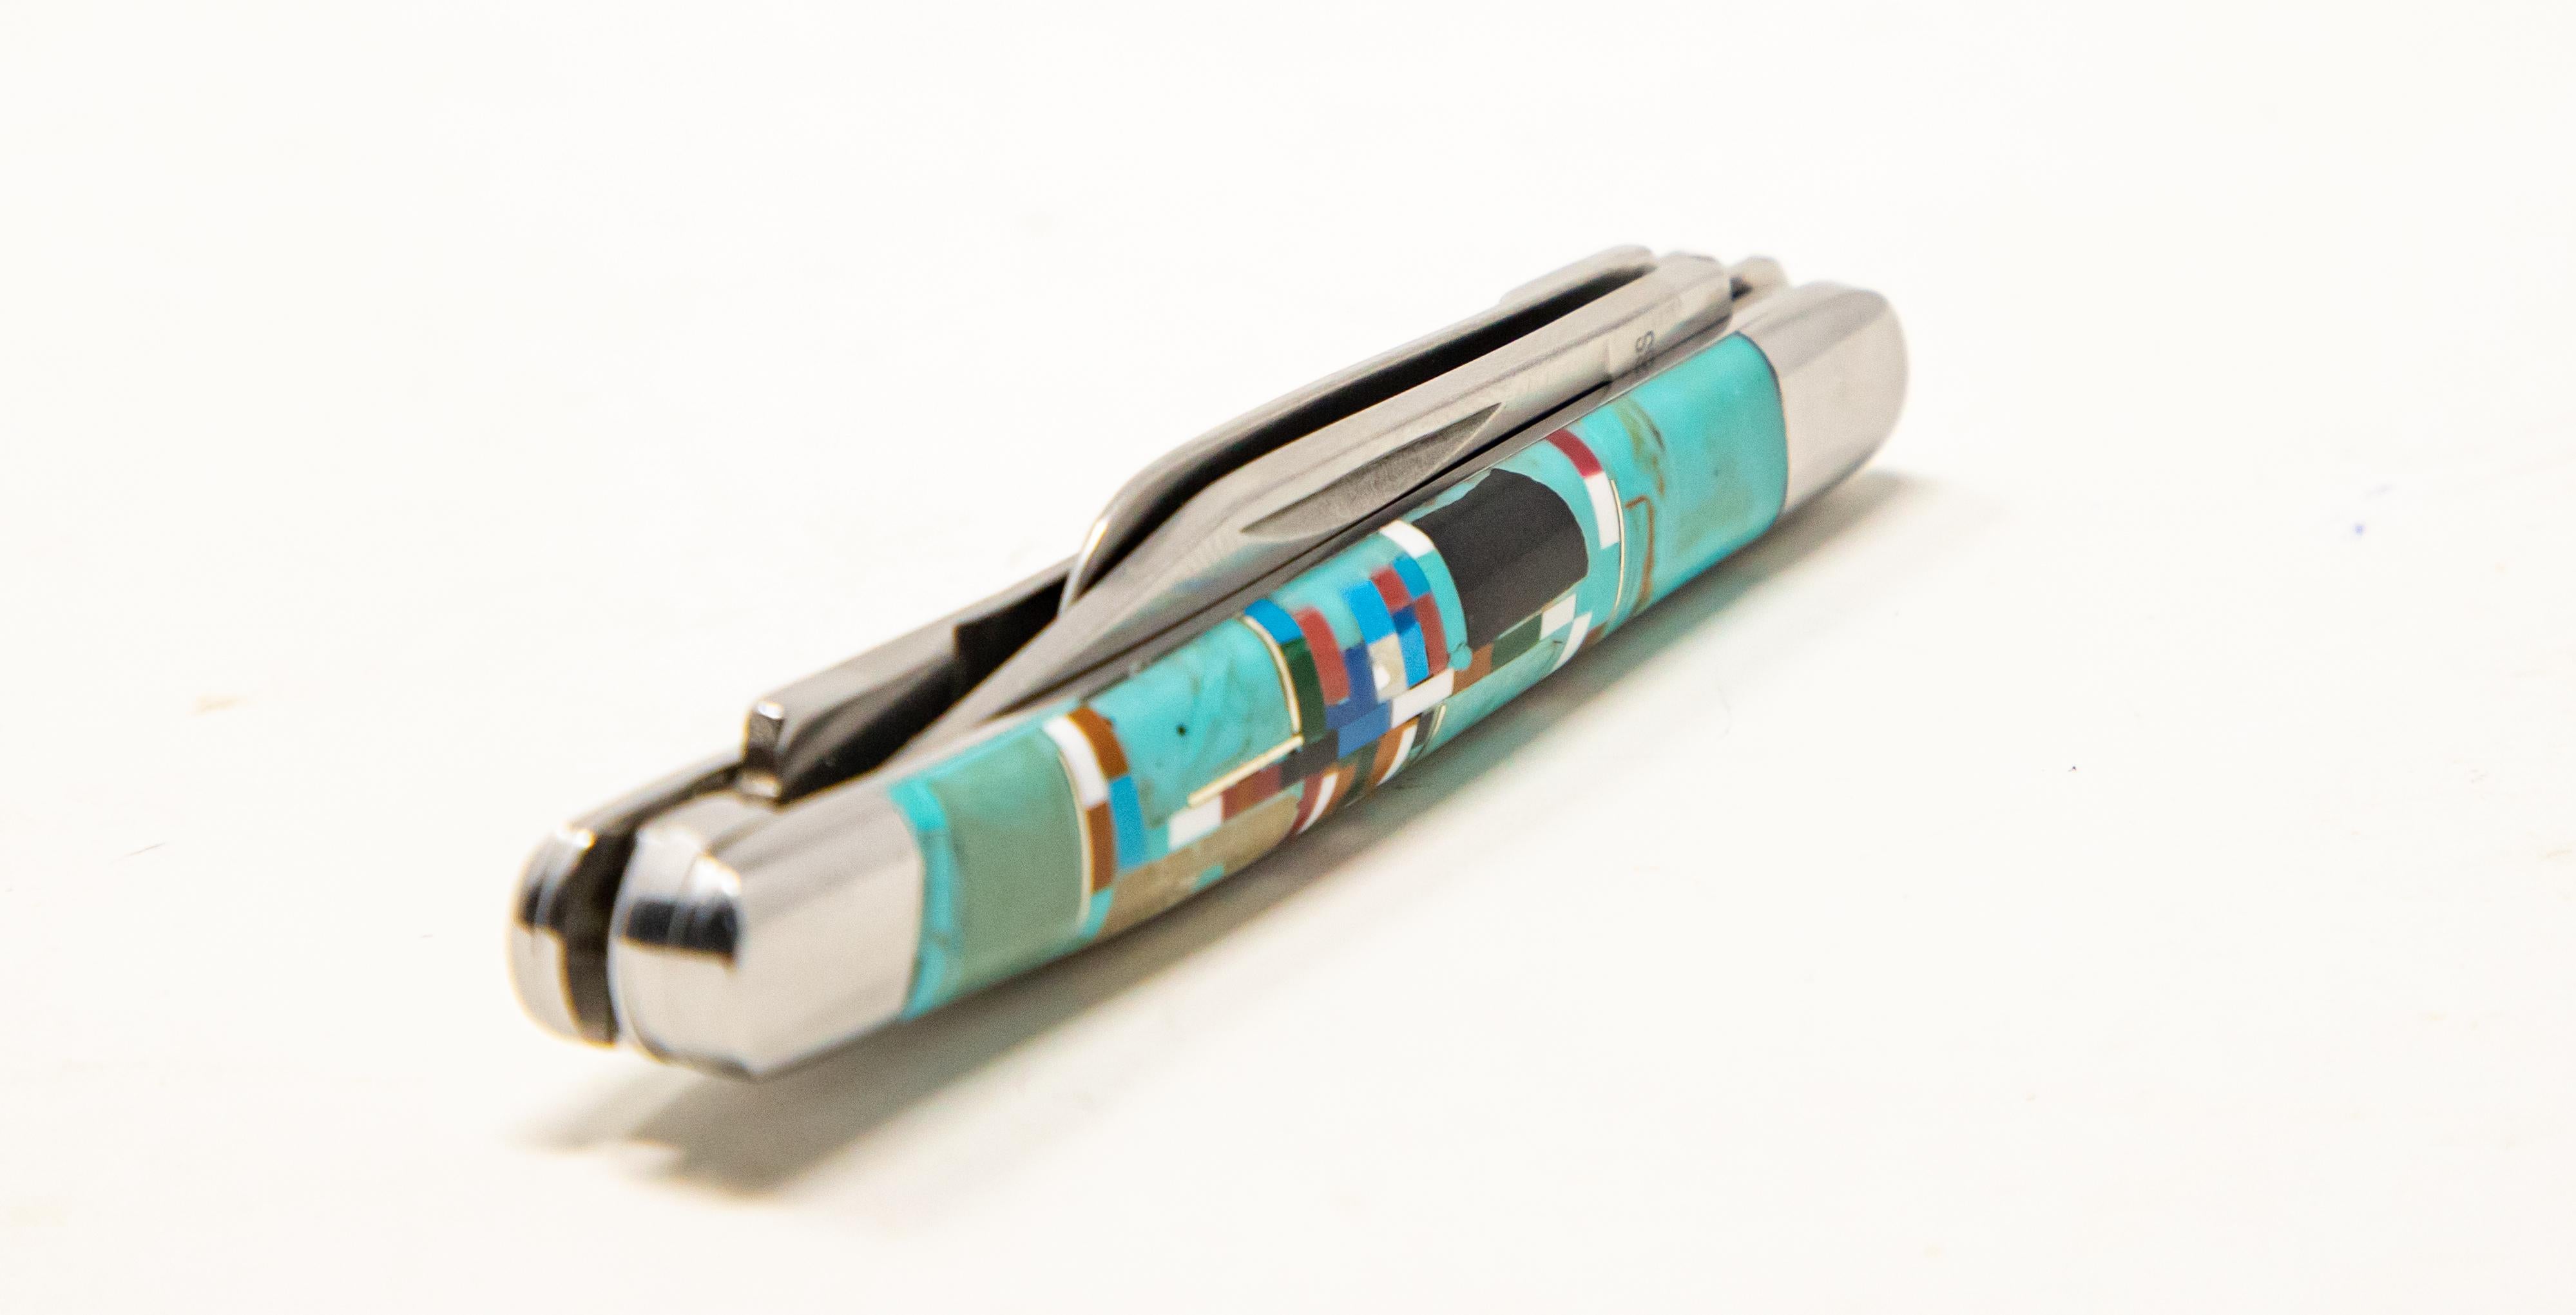 Offering this interesting pocket knife with stonework and inlay in many colors. The main color is turquoise and has reds, blues, and whites. Three stainless blades that fold out in different sizes.